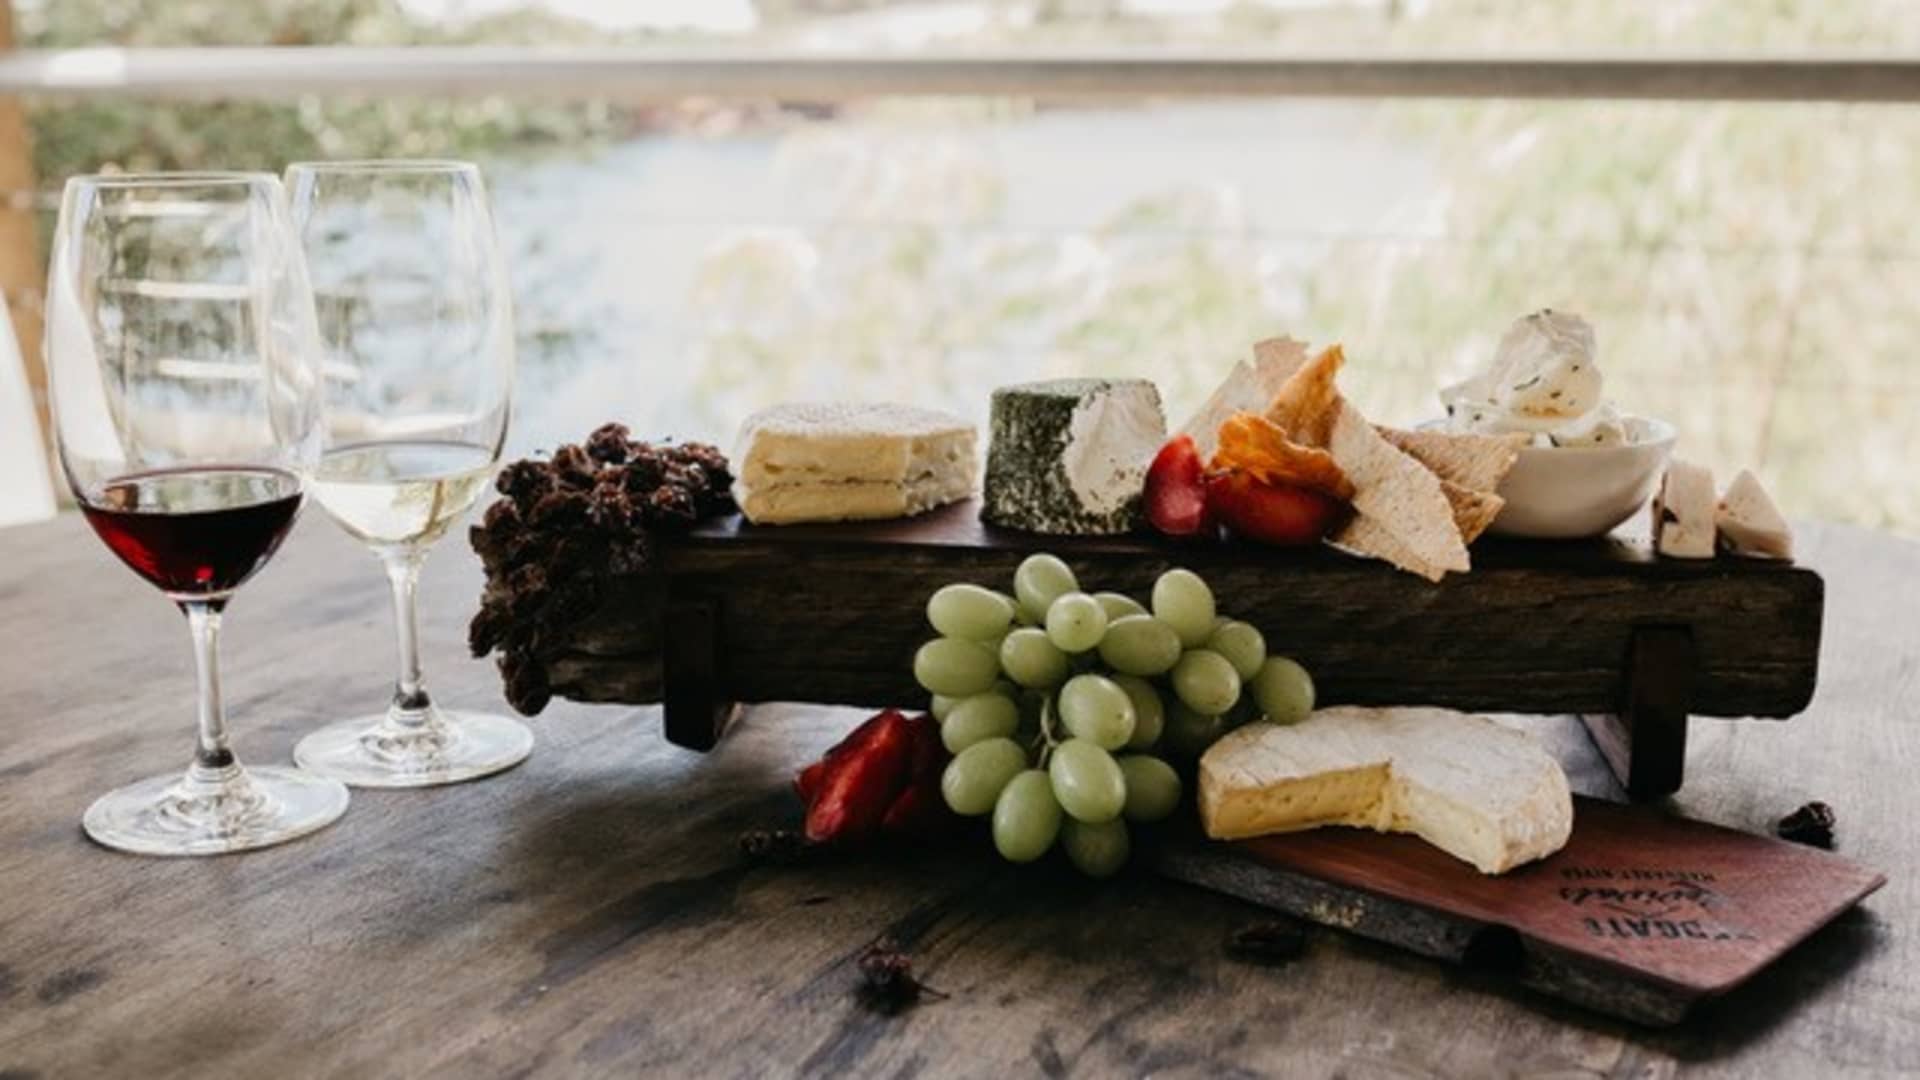 A cheeseboard from Yallingup Cheese Company